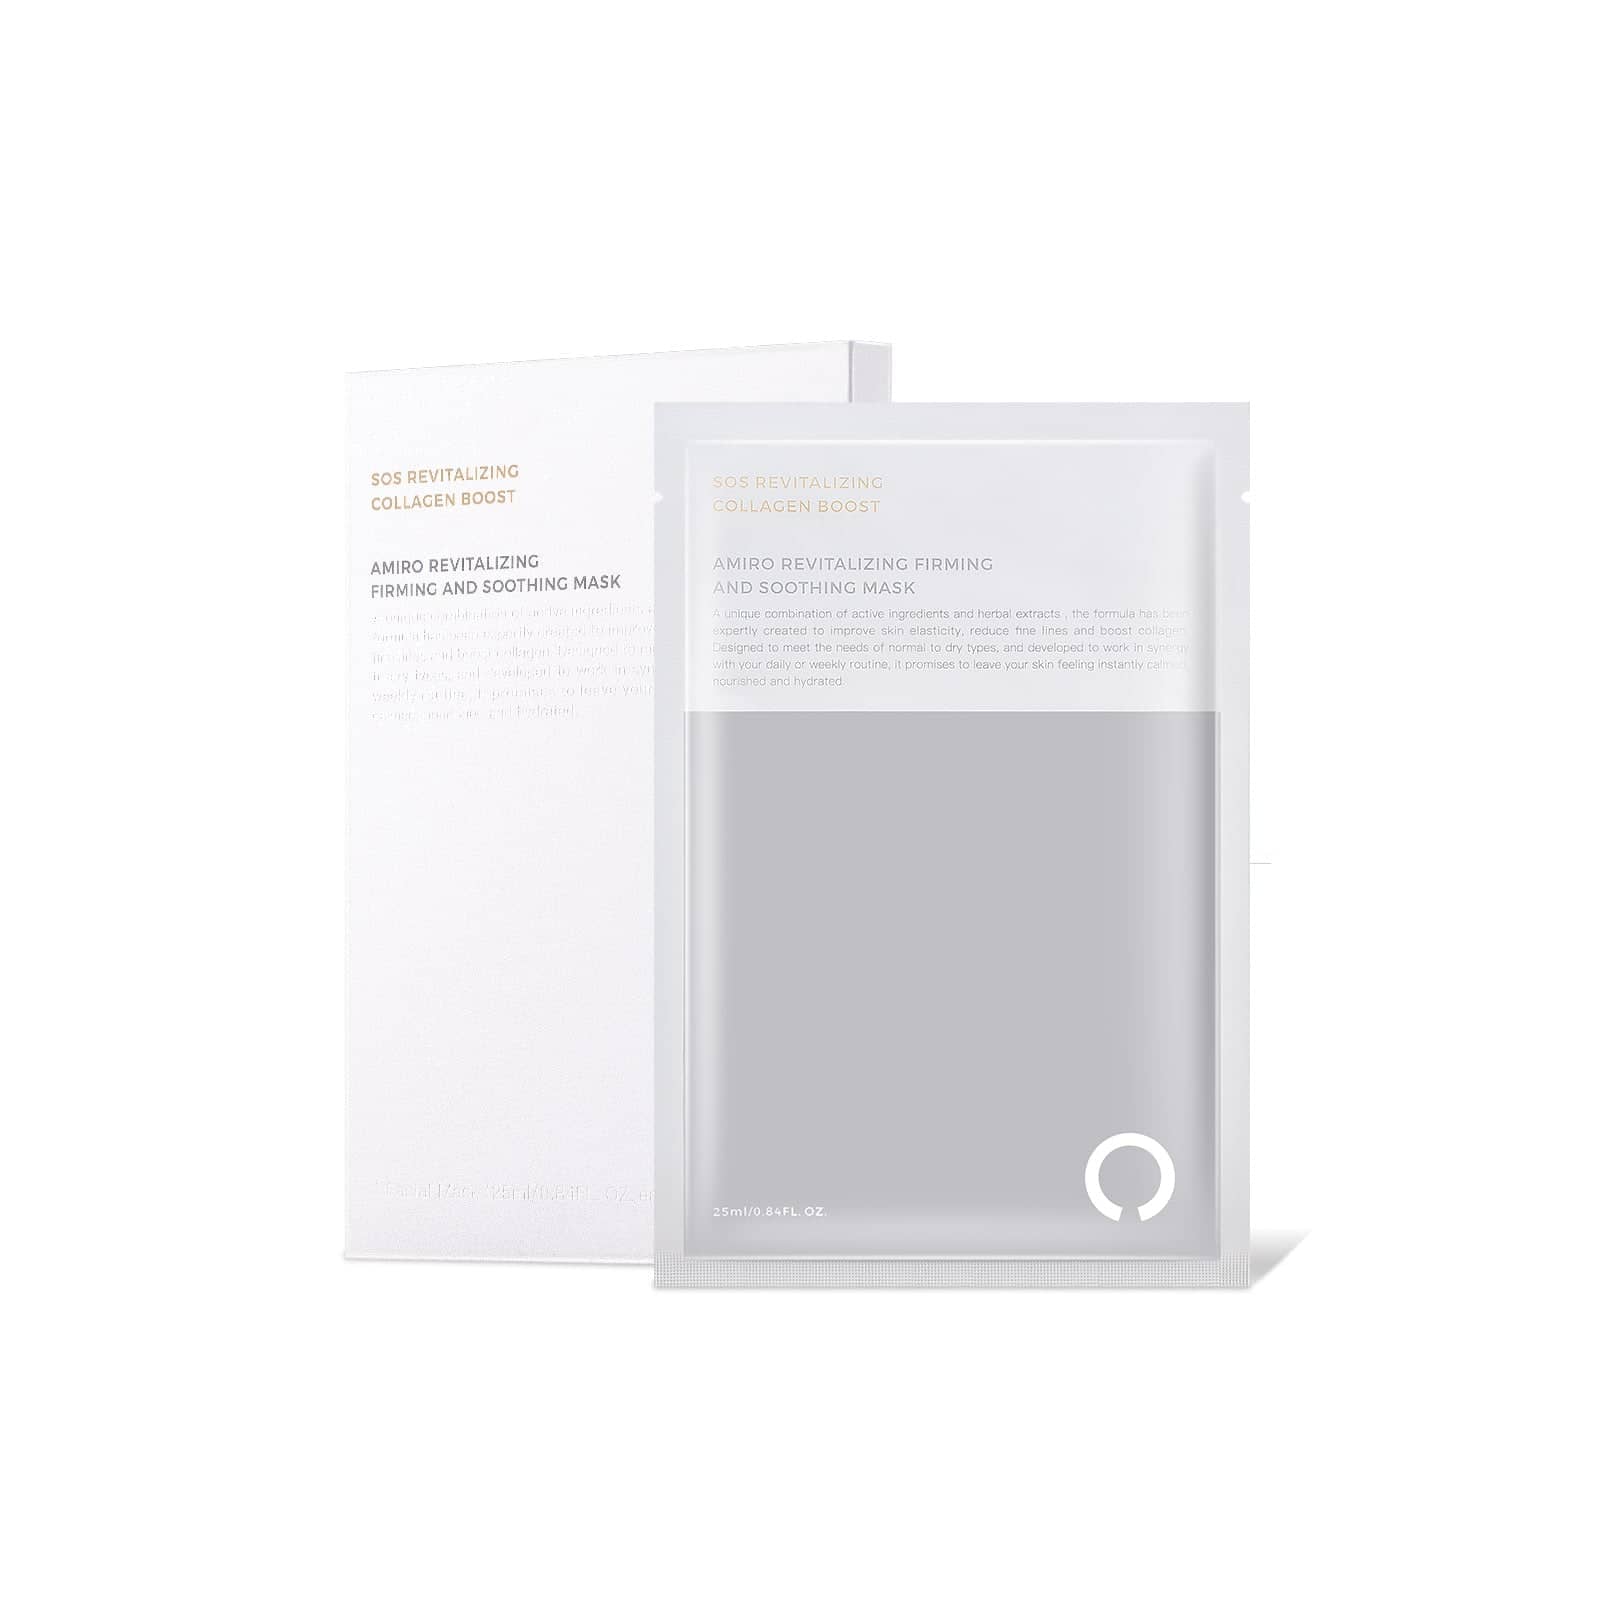 AMIRO Dedicated Facial Mask for S1 - Pack of 4 AMIRO